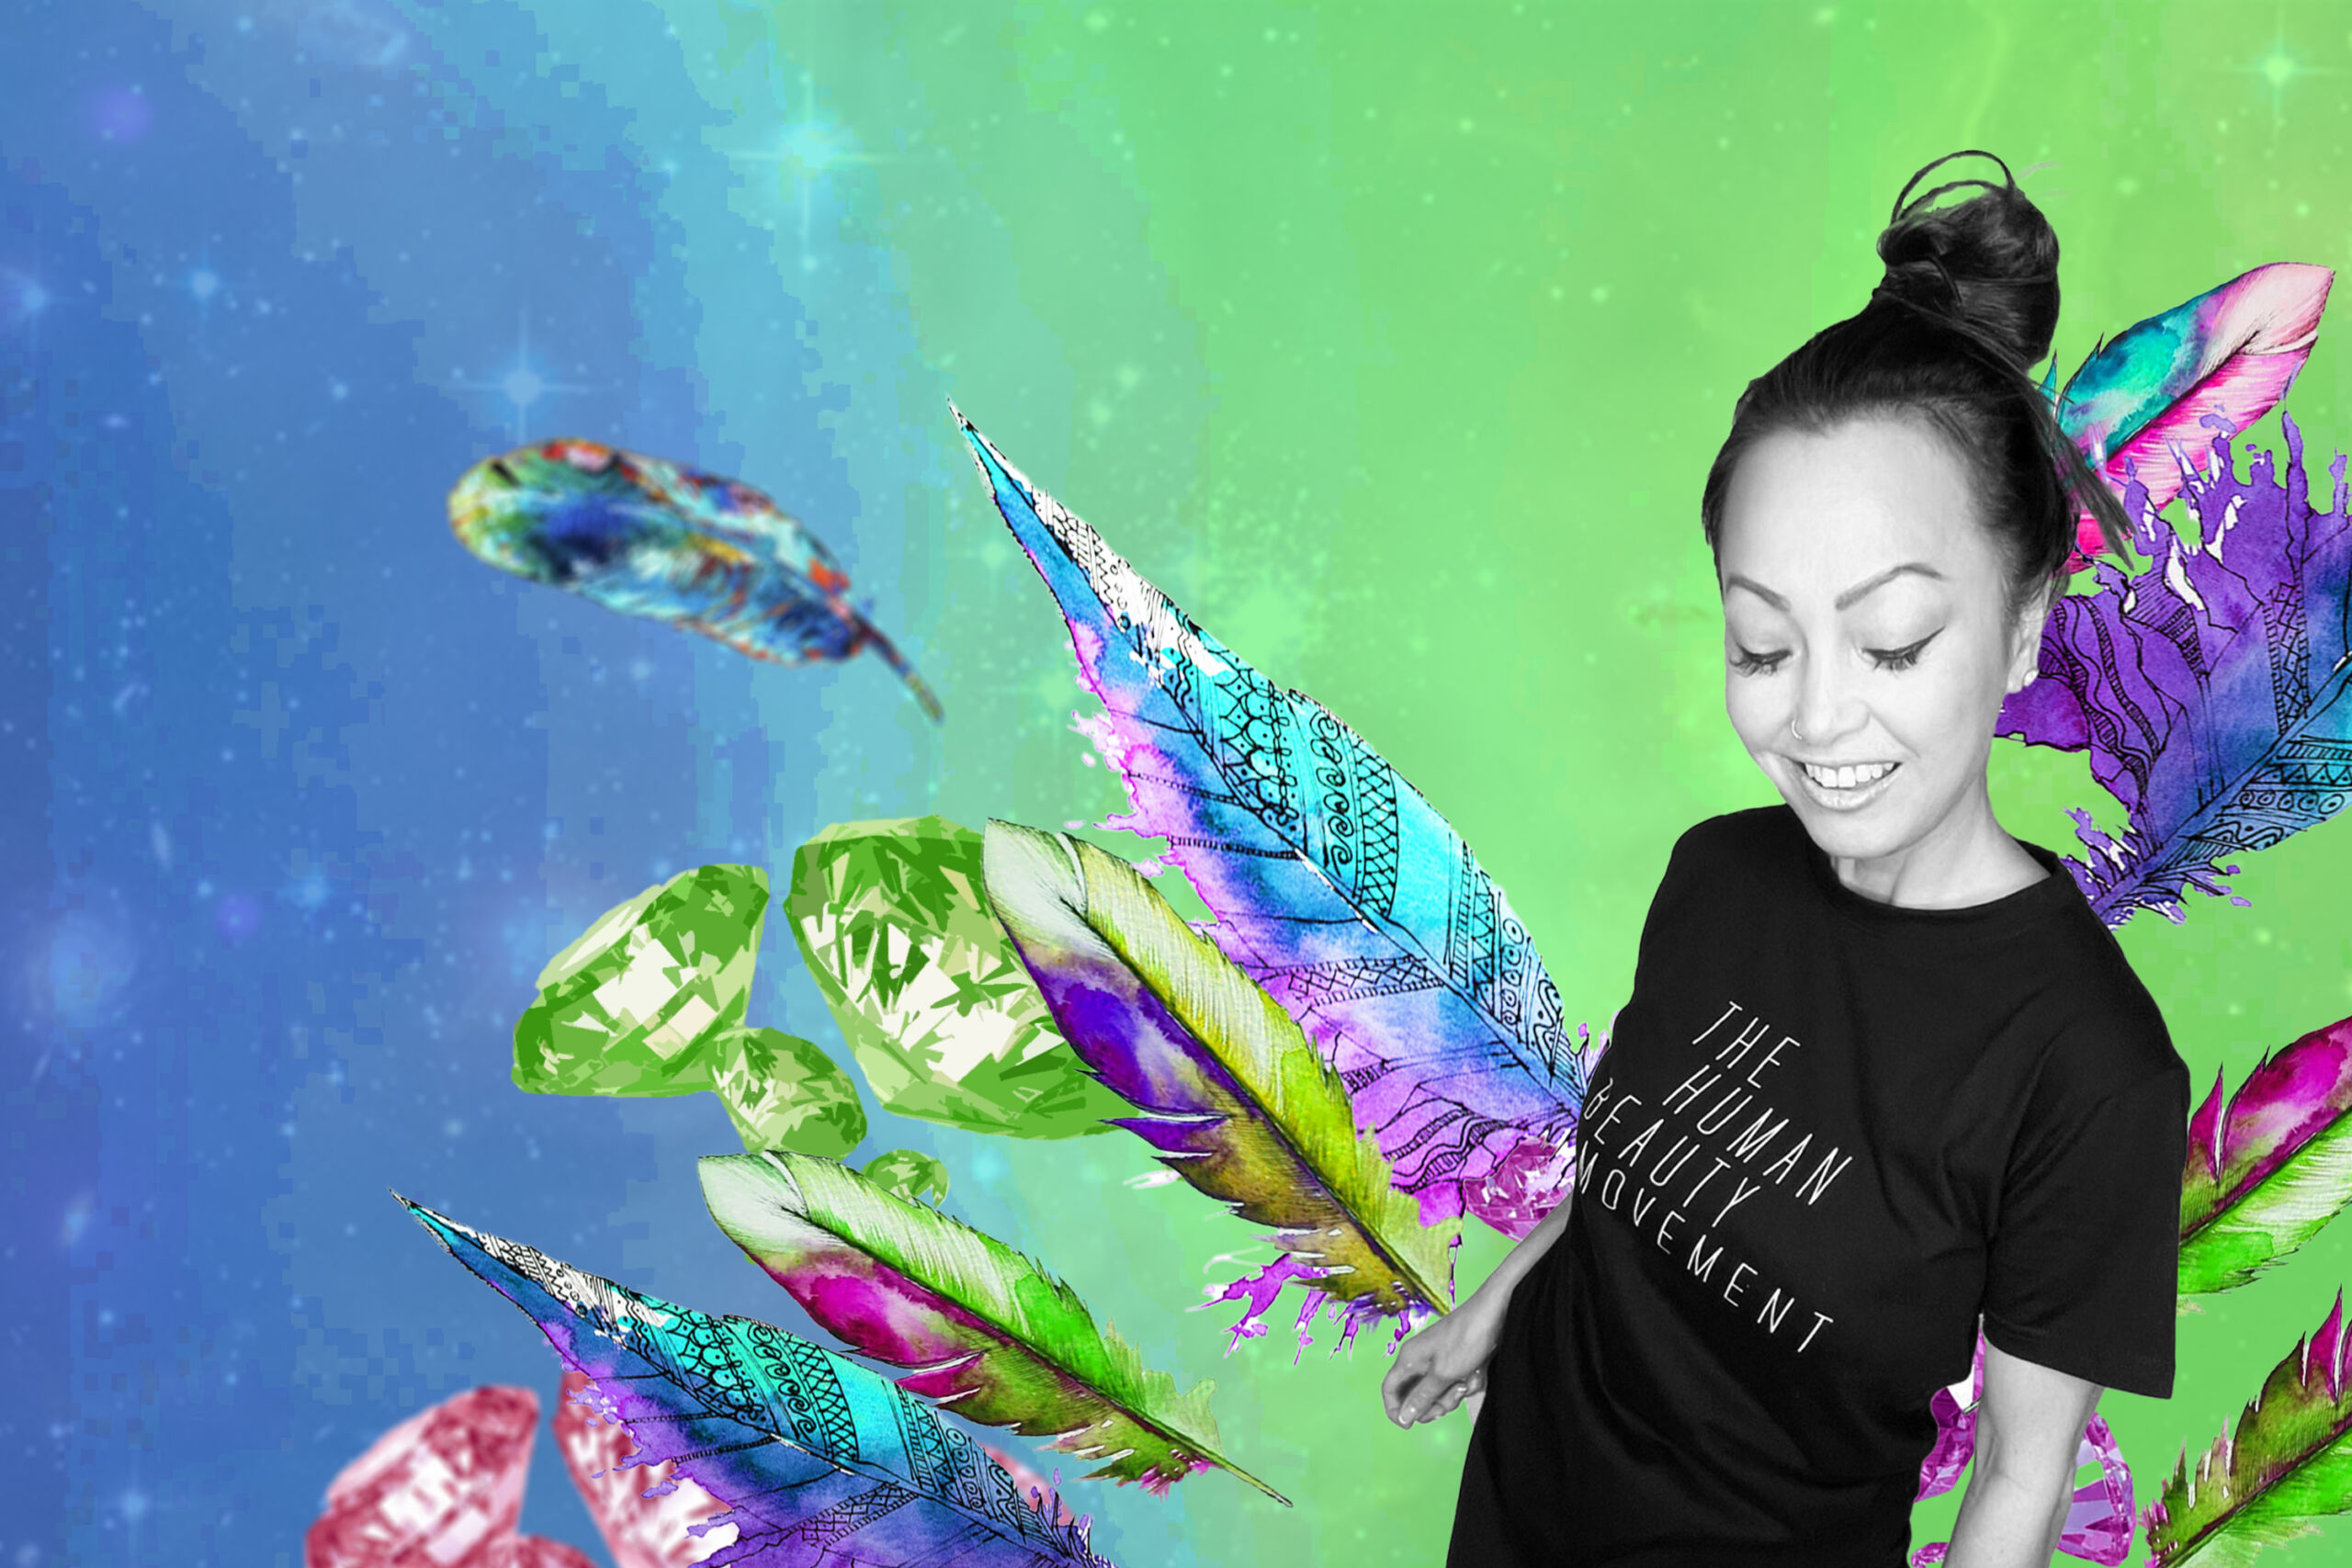 Founder Jennifer Norman in a black HBM tee with her hair in a messy bun smiling against a virtual backgrop of fethers, crystals, and blue-green gradient